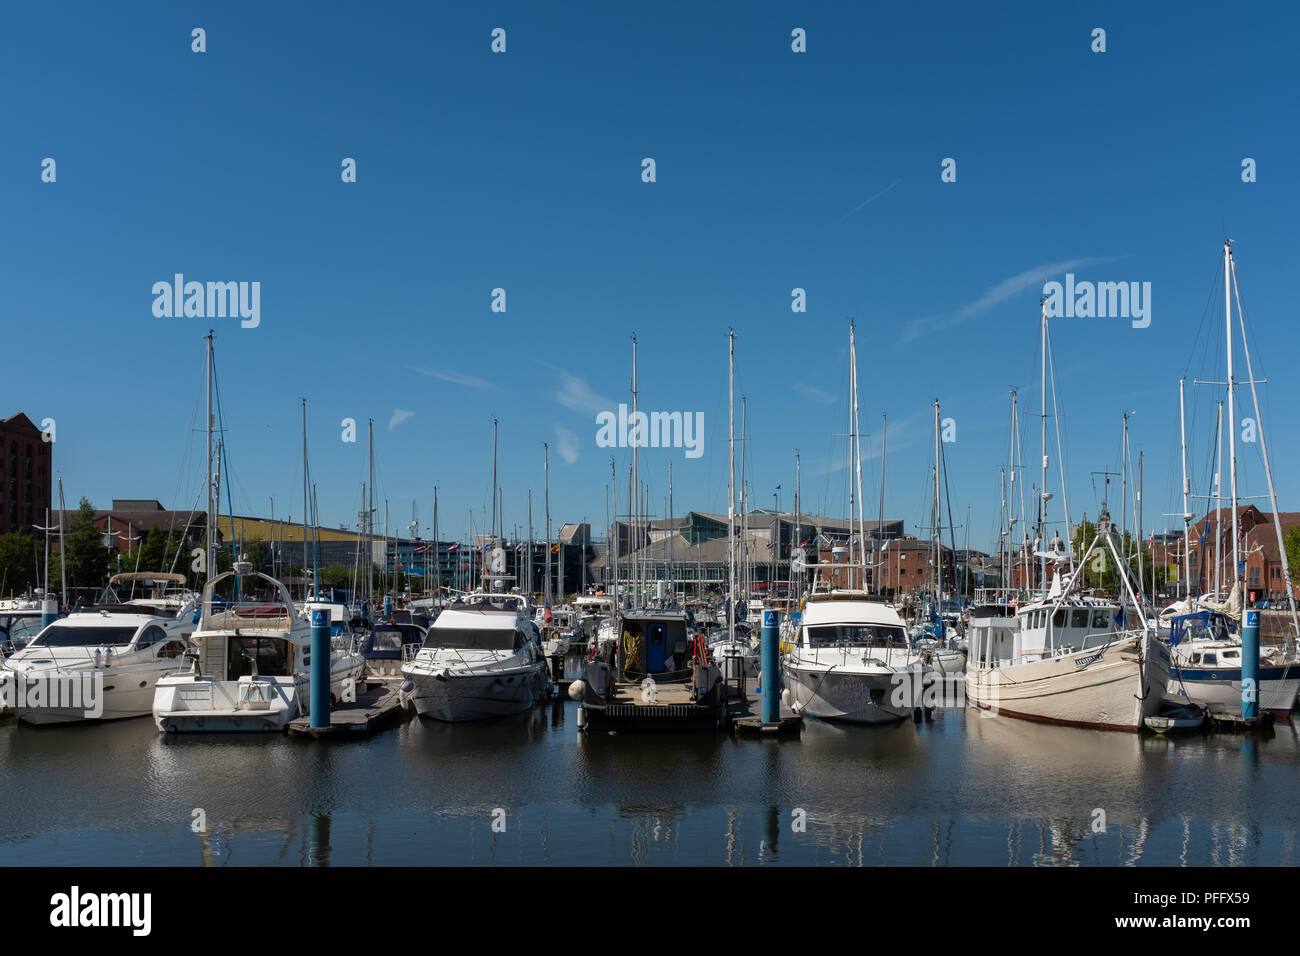 Image of Kingston Upon Hull UK City of Culture 2017. Shown around Humber Dock and Marina are the flags of different nations and baots docked. Stock Photo